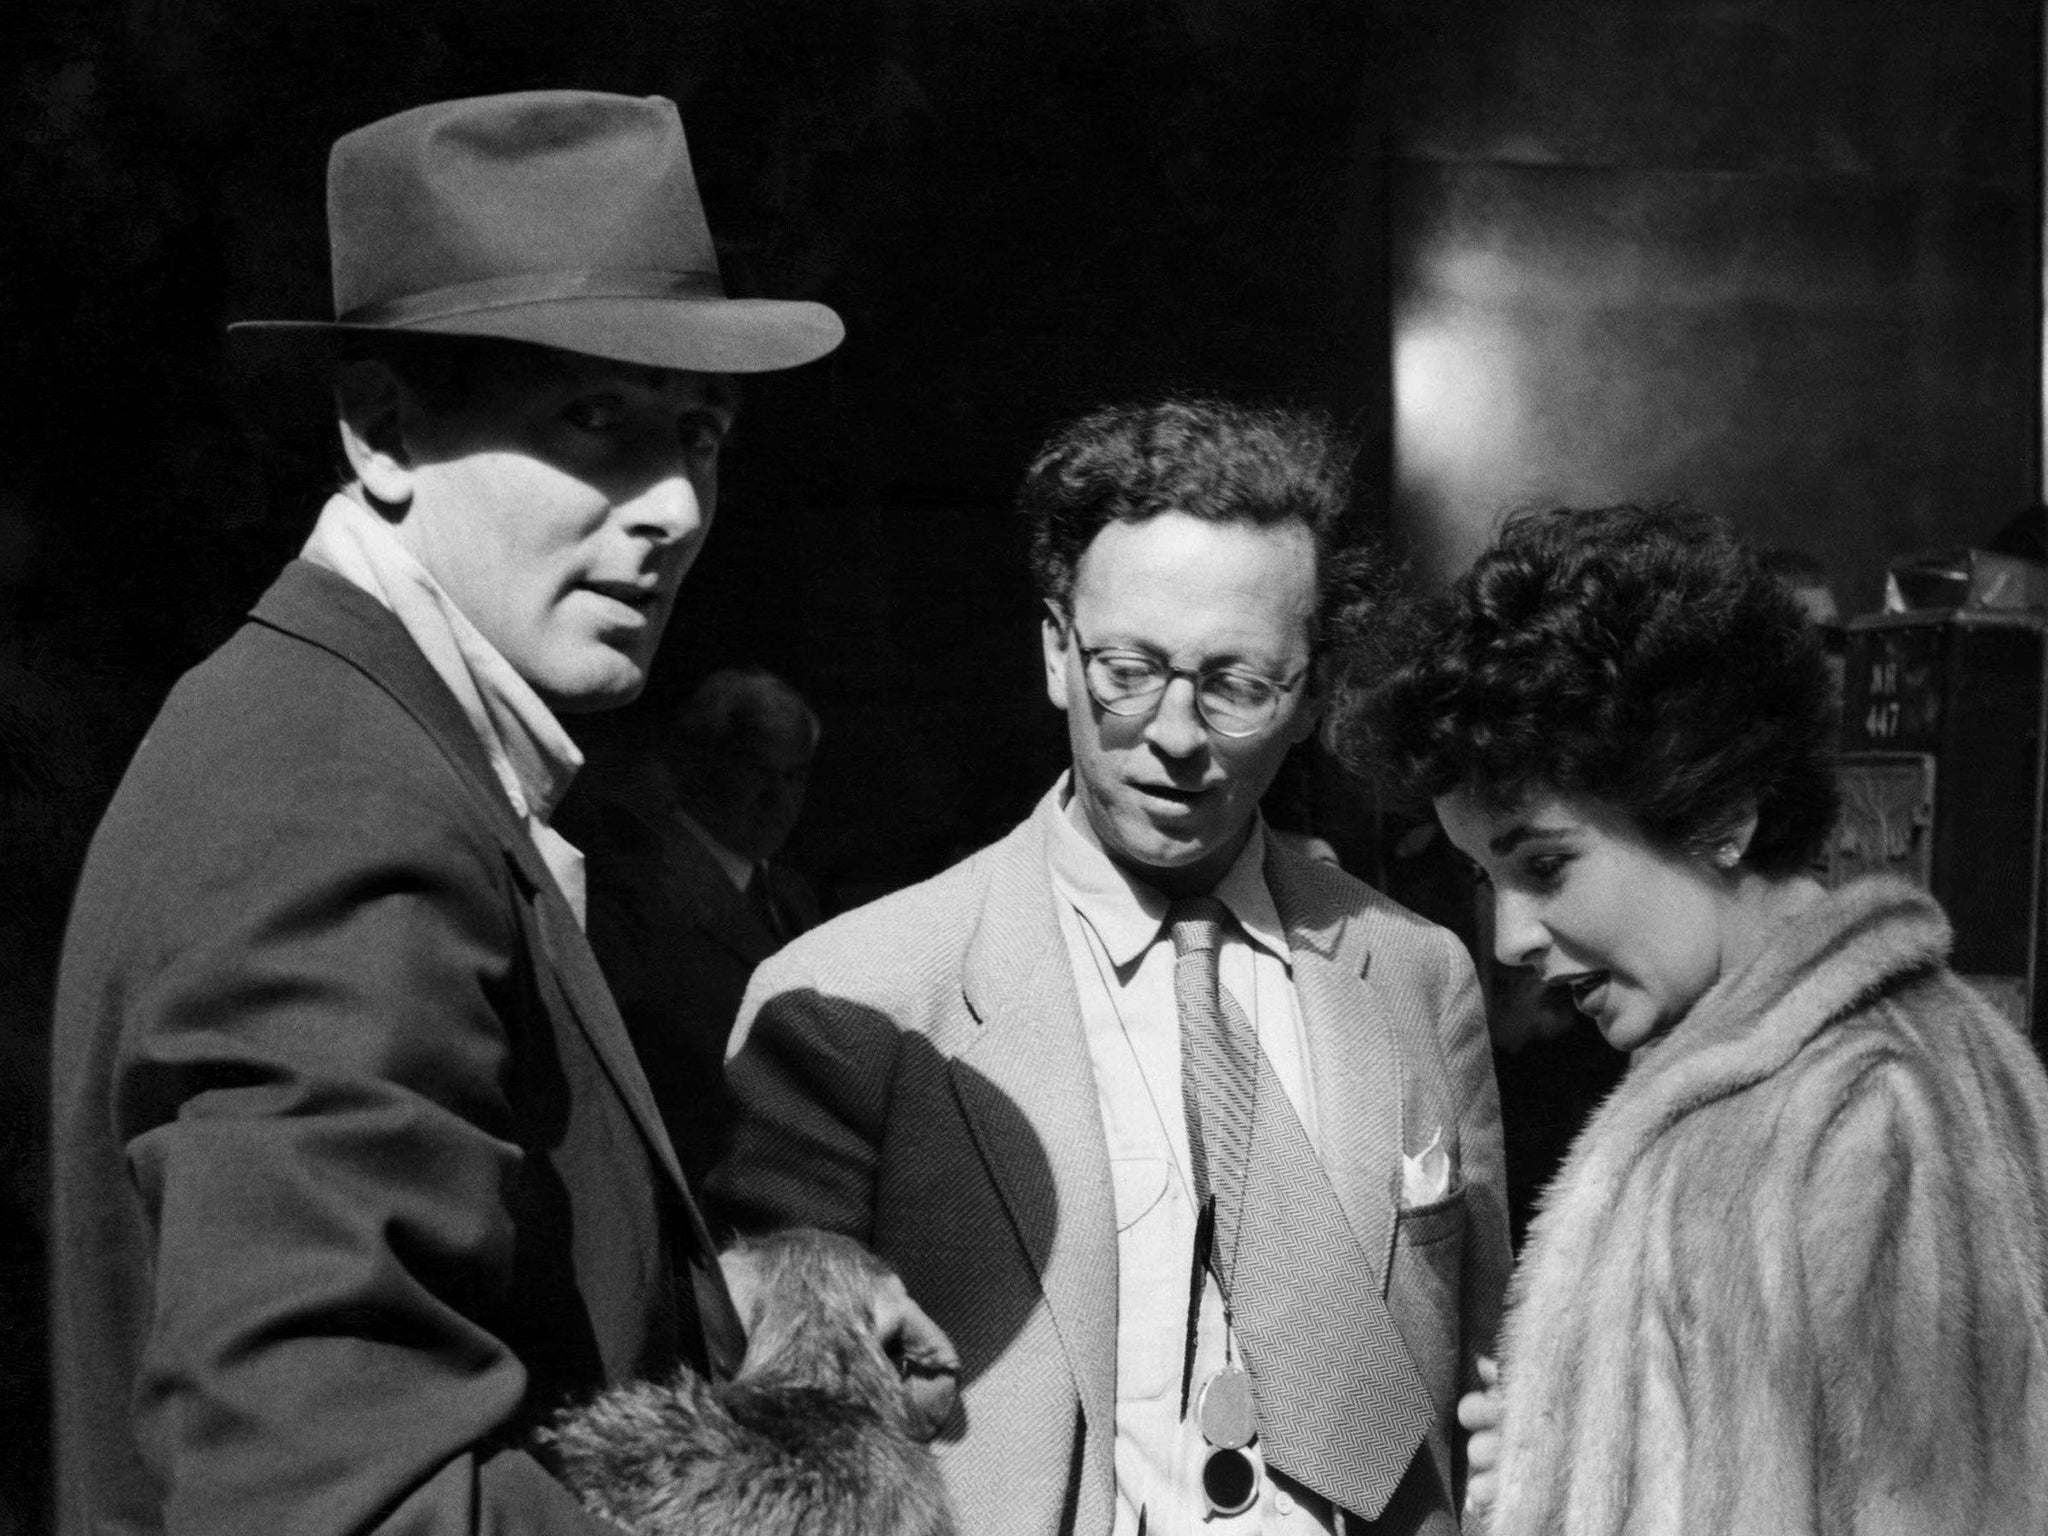 Slocombe, centre, during a visit from Elizabeth Taylor and her husband, fellow actor Michael Wilding, to the set of the 1953 Ealing comedy ‘The Titfield Thunderbolt’